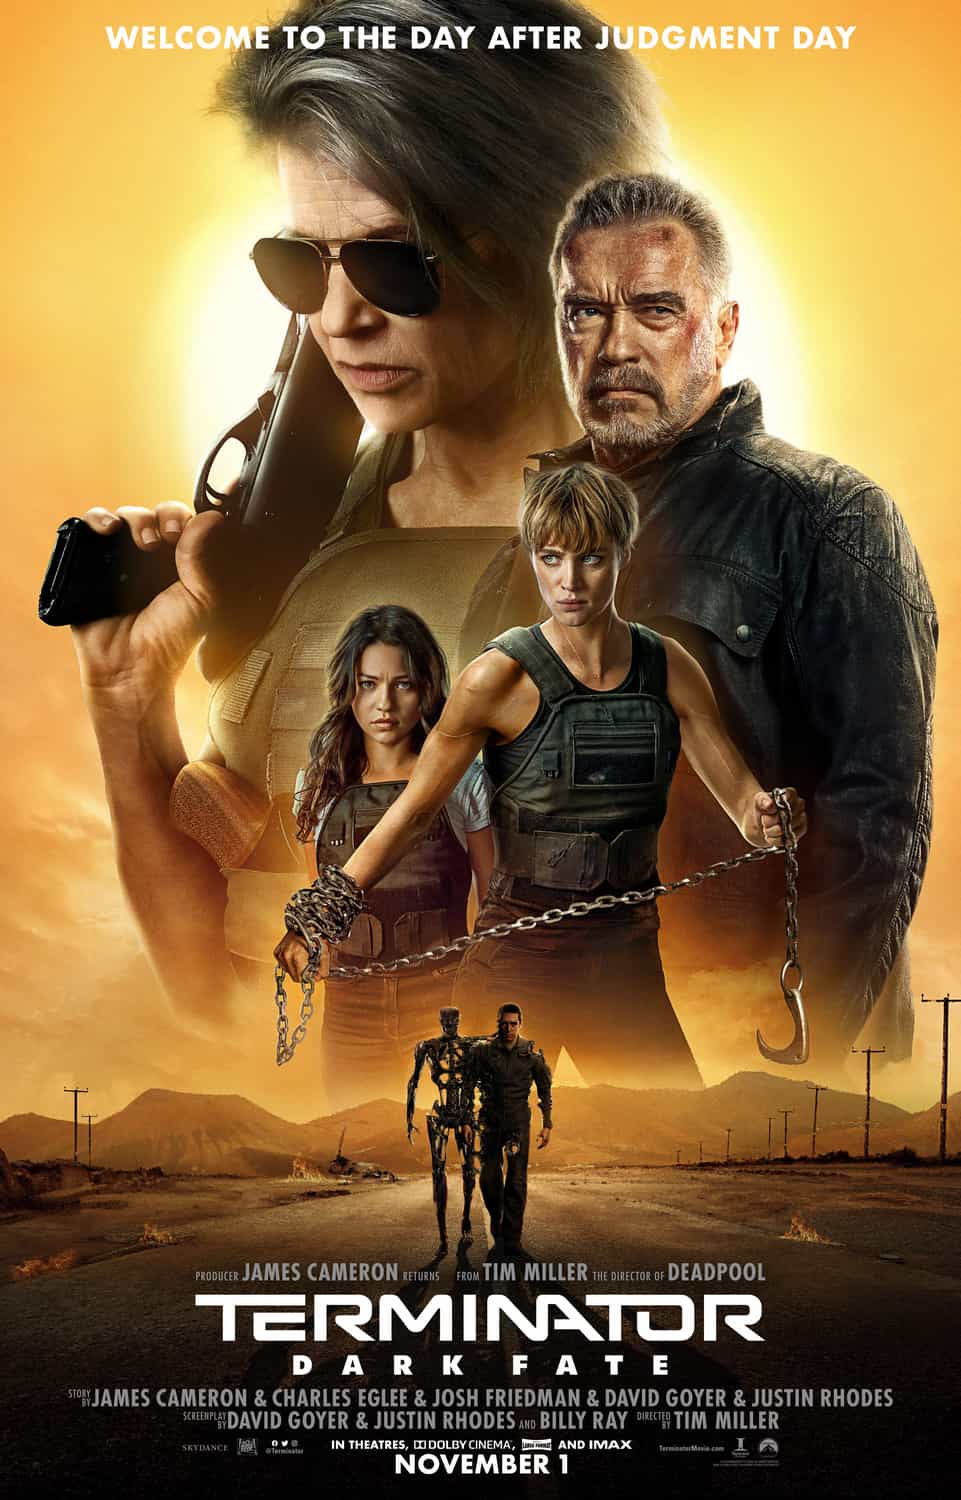 US Box Office Analysis 1 - 3 November 2019:  Terminator: Dark Fate makes its debut at the top but its worrying times for the franchise